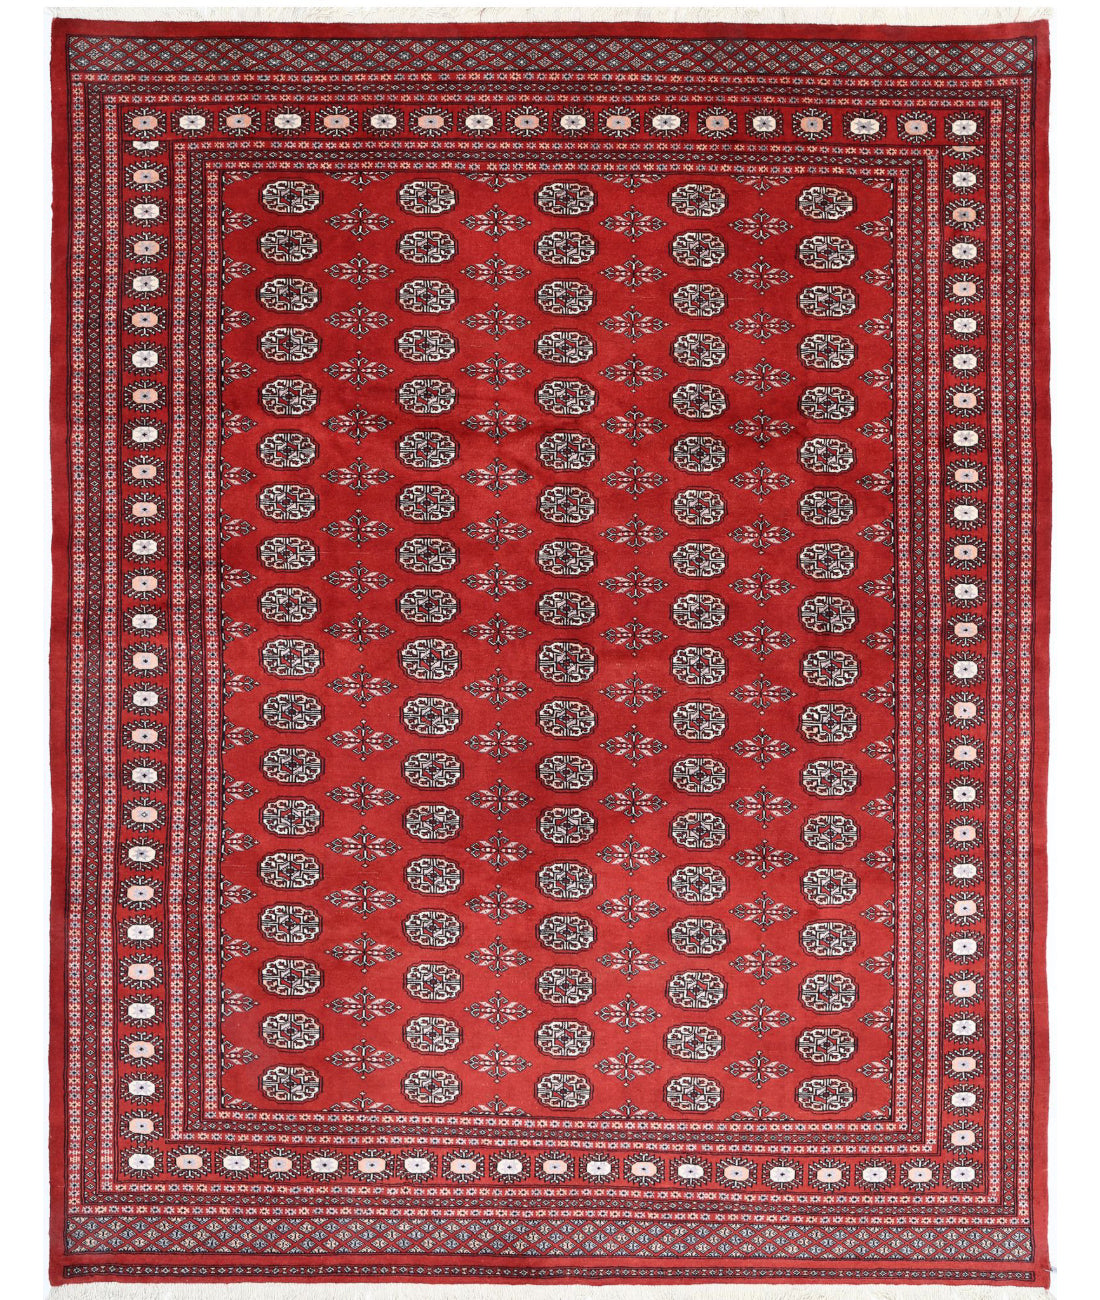 Hand Knotted Tribal Bokhara Wool Rug - 7'11'' x 10'0'' 7'11'' x 10'0'' (238 X 300) / Red / Ivory